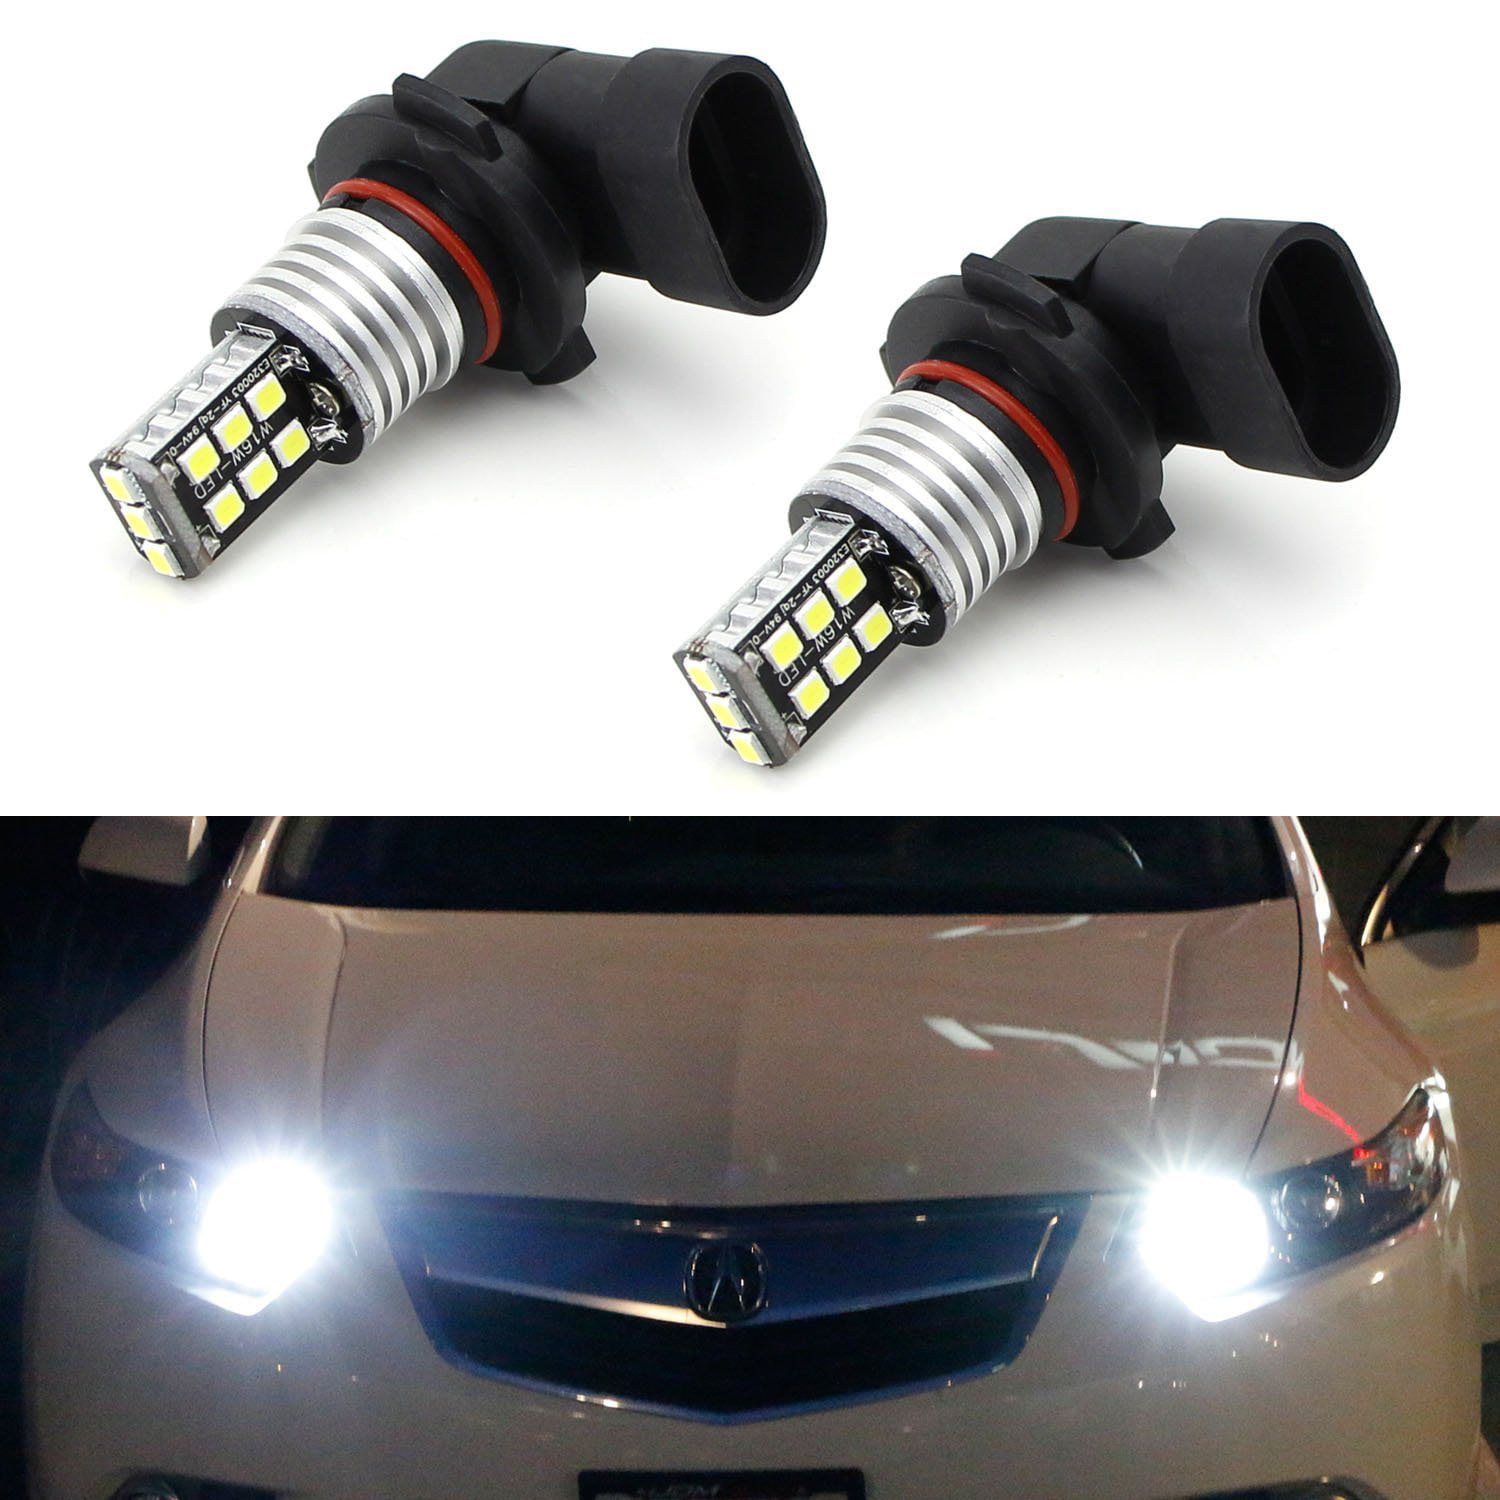 Compatible For Acura TSX RDX TL MDX Civic Accord CRZ iJDMTOY 8K Blue 80W 16-CREE 9005 LED High Beam Daytime Running Lights Kit